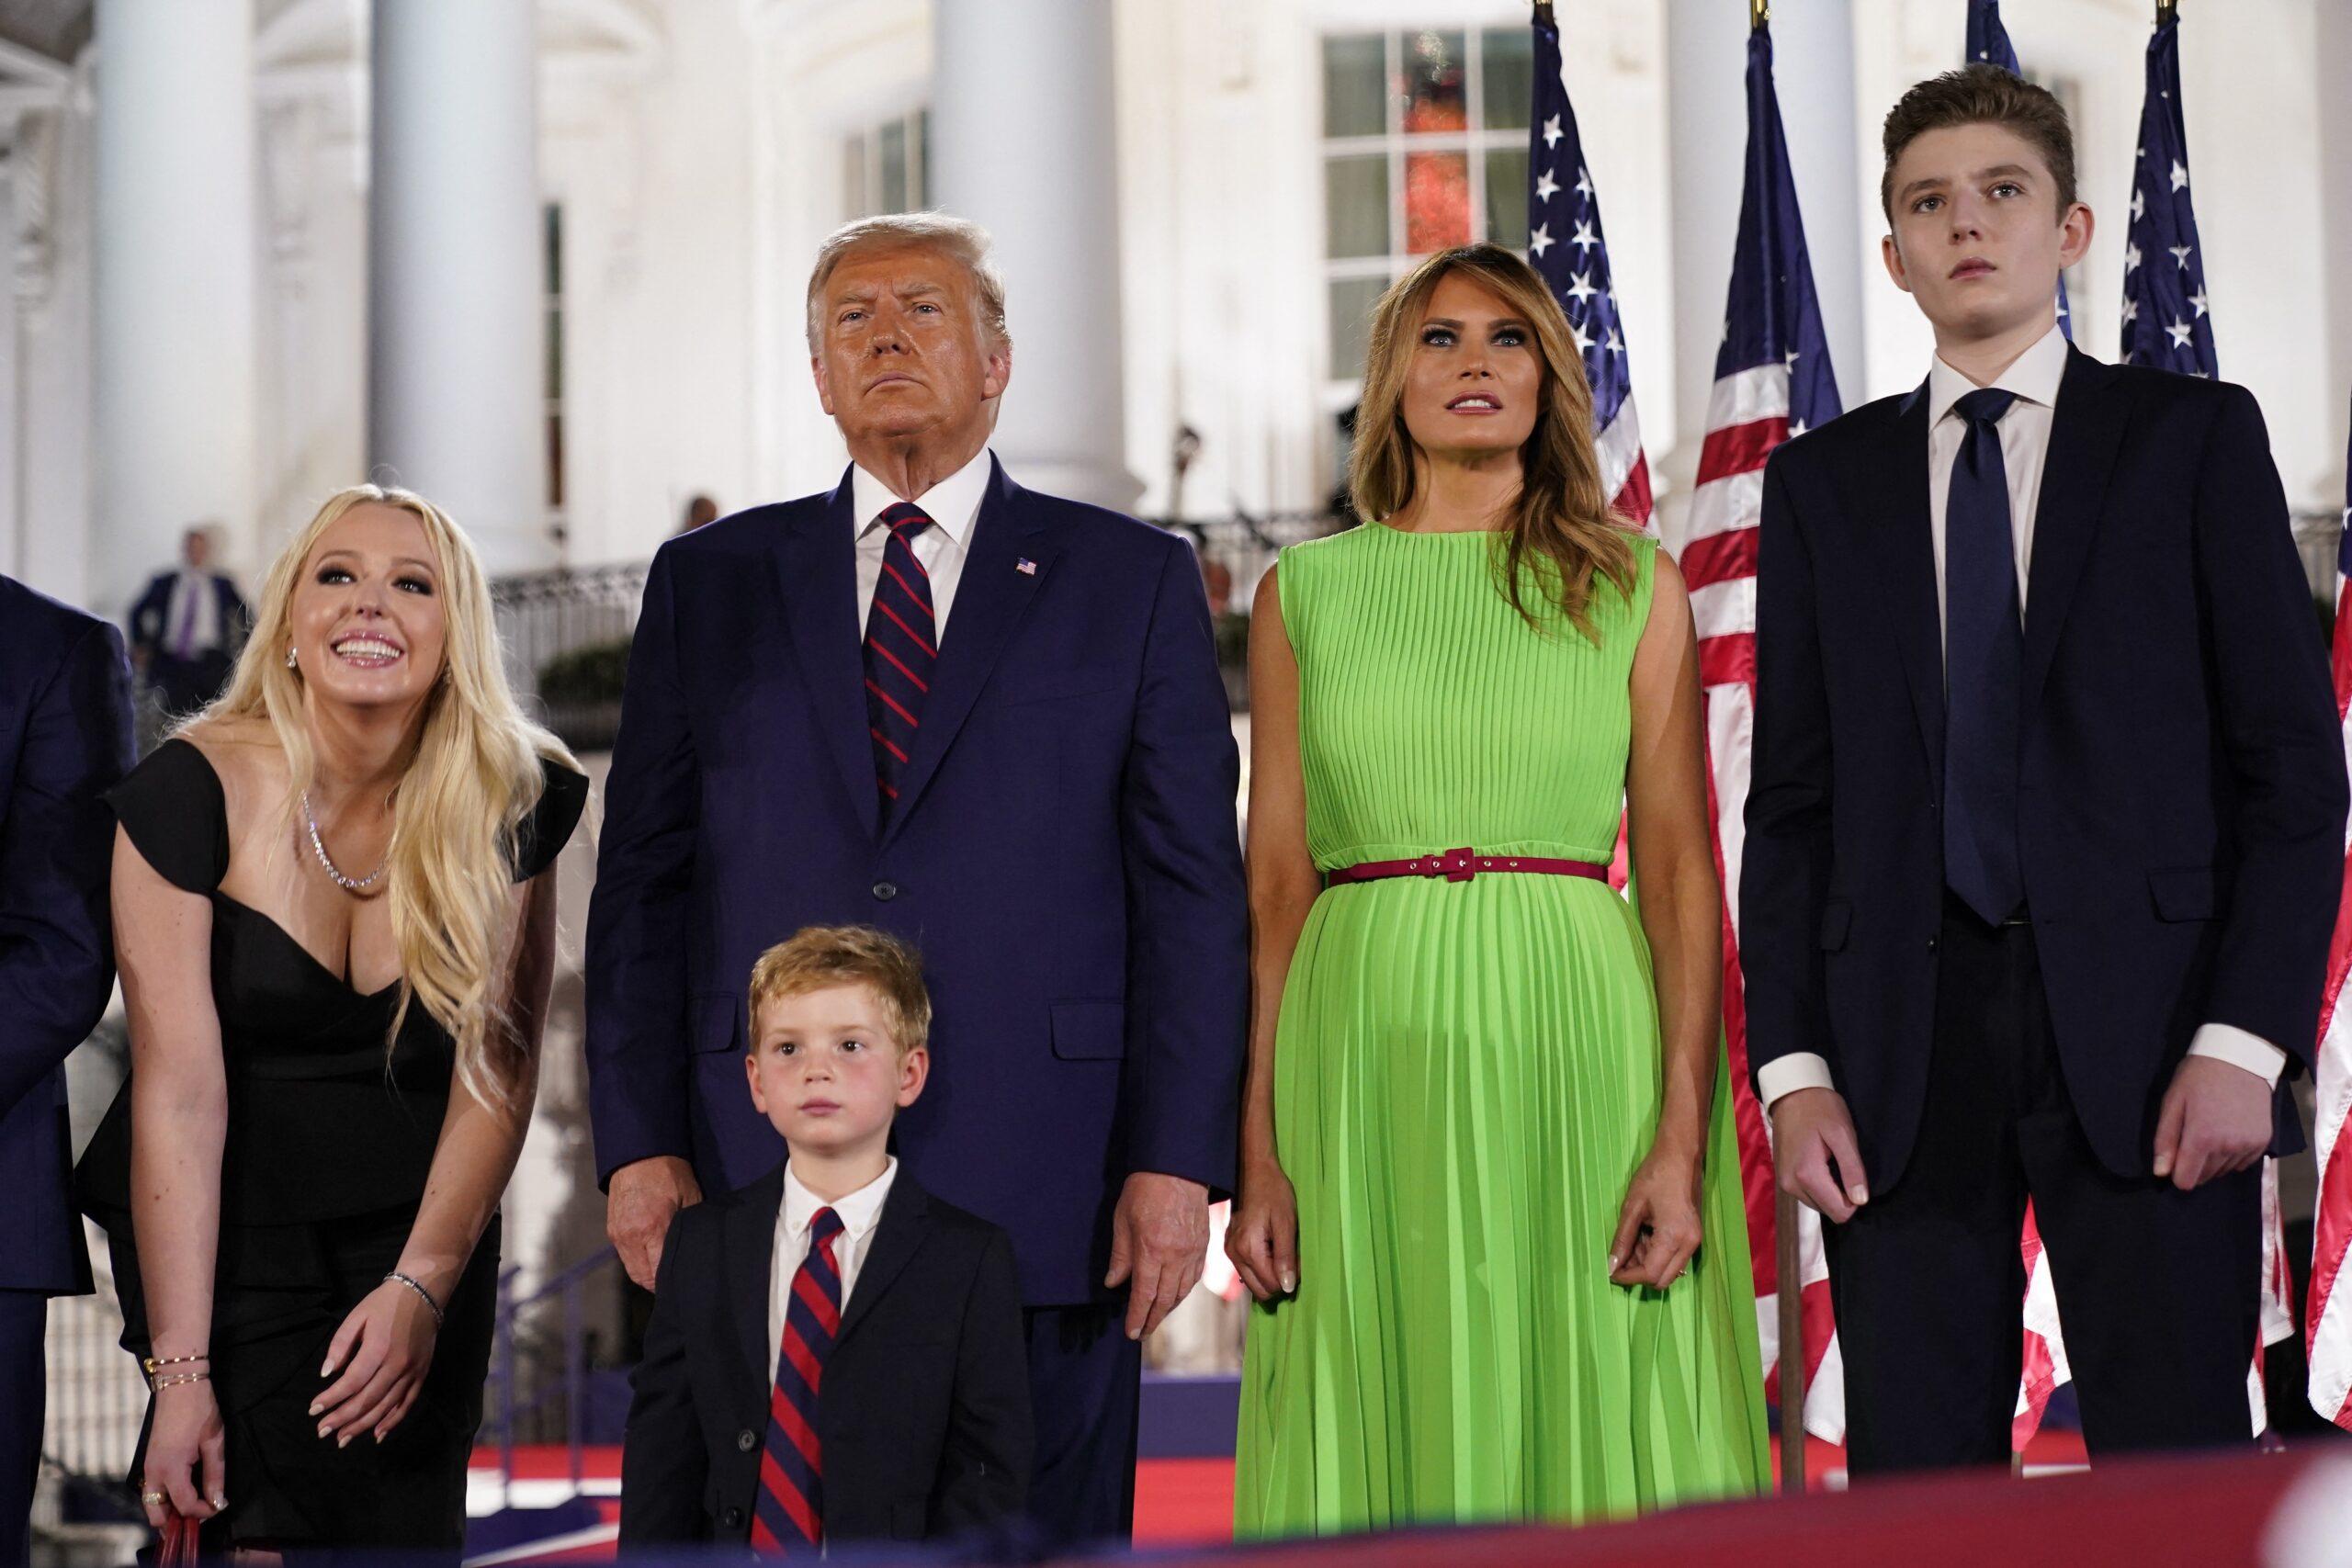 Republicans Furious Over Donald Trump's Son Barron Being Labeled 'Fair Game' After Turning 18